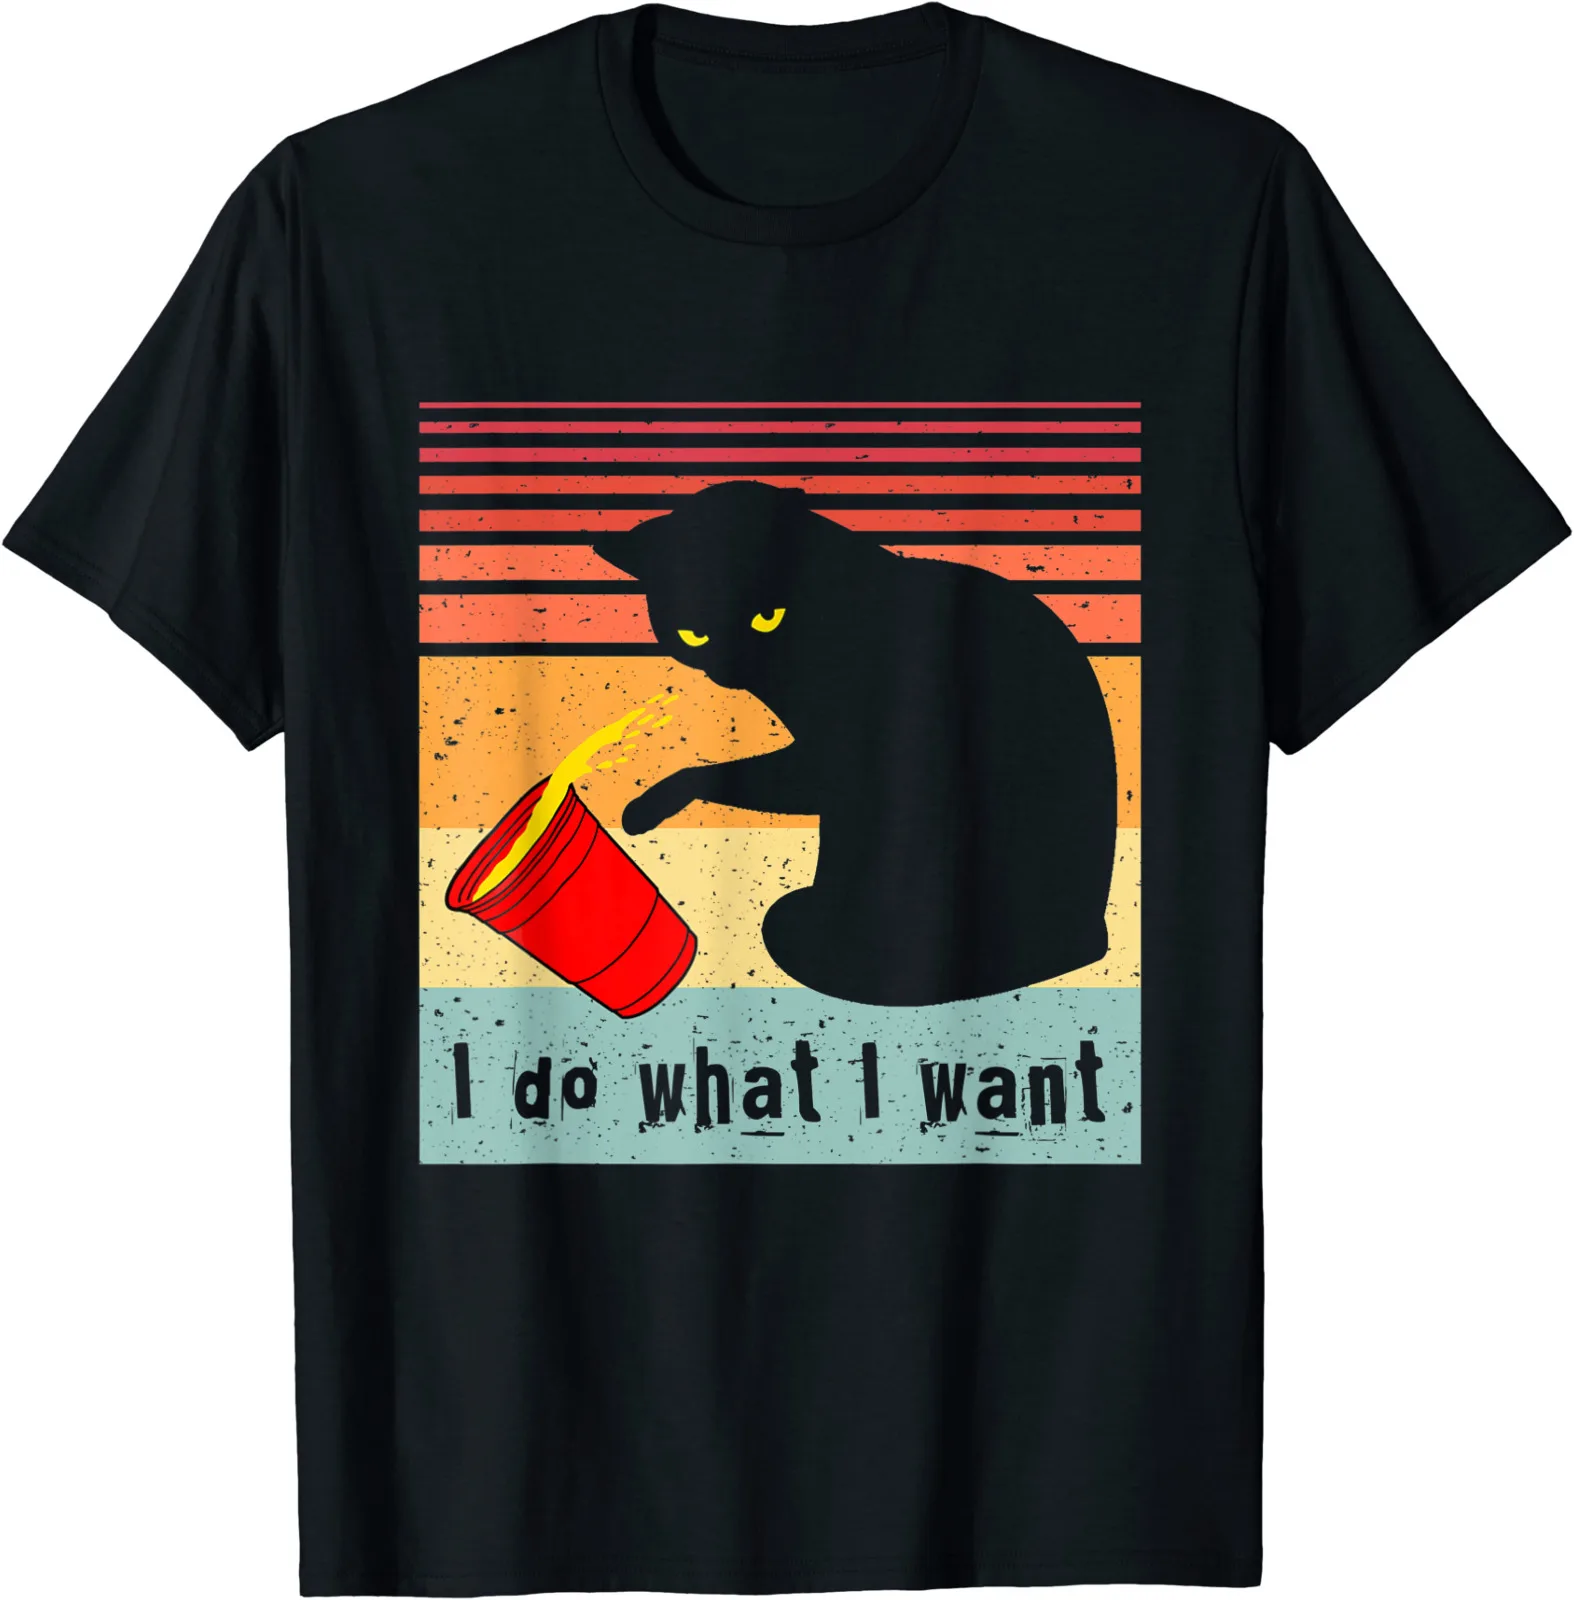 

Do What I Want Vintage Black Cat Red Japanese T Crew Neck T-shirt Men Short Sleeve Casual Tshirt Tee Tops Tshirt Outfits